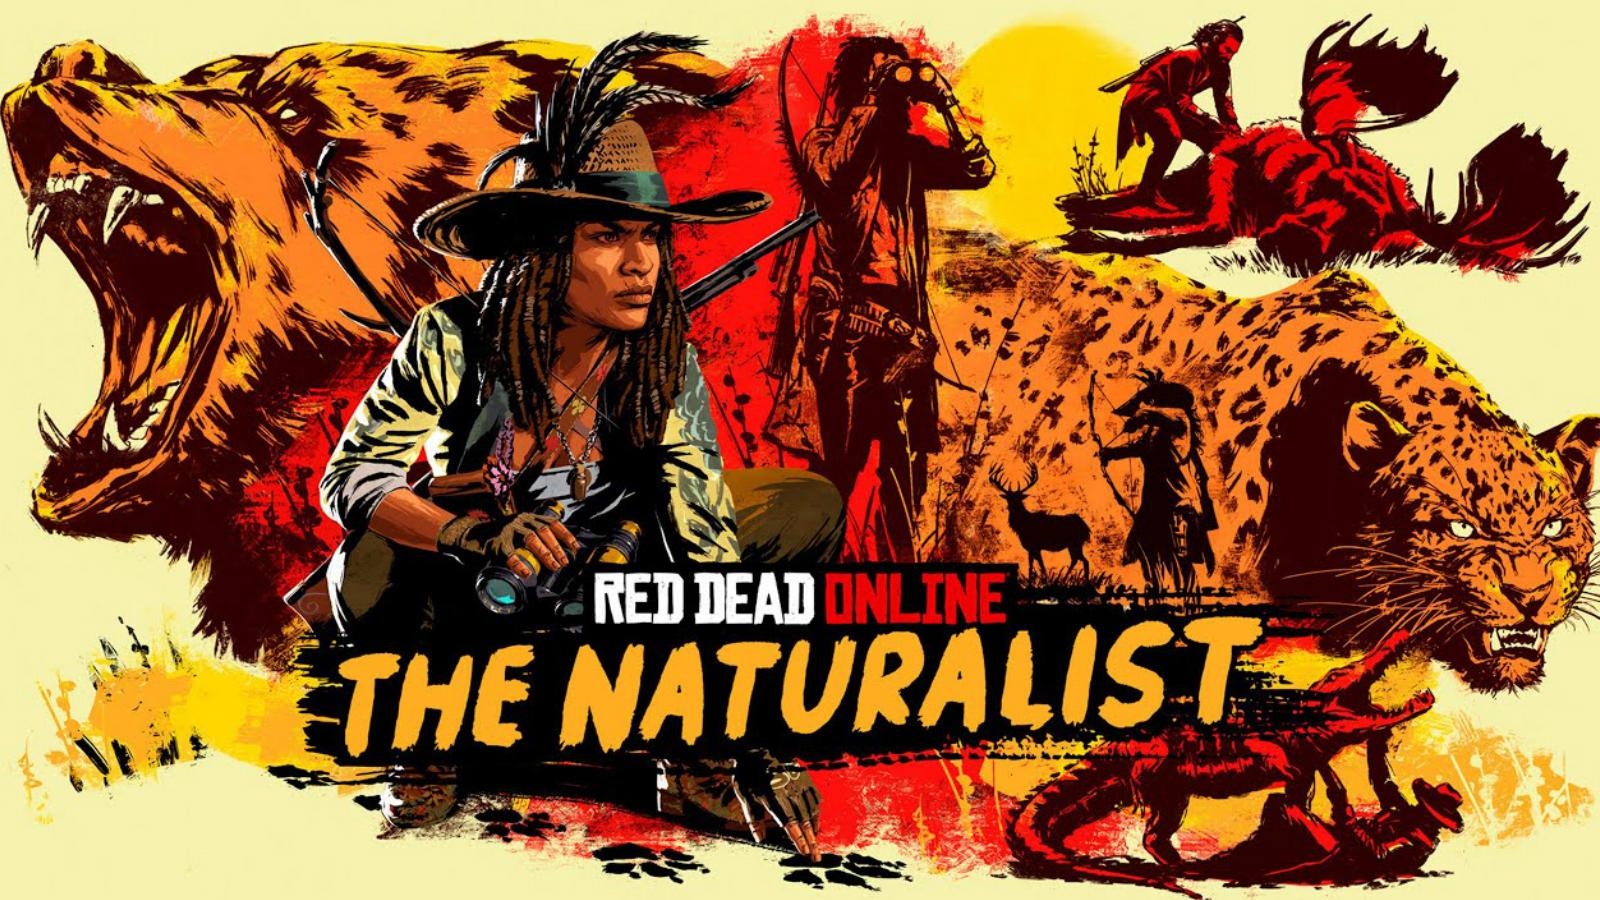 The Naturalist in Red Dead Online